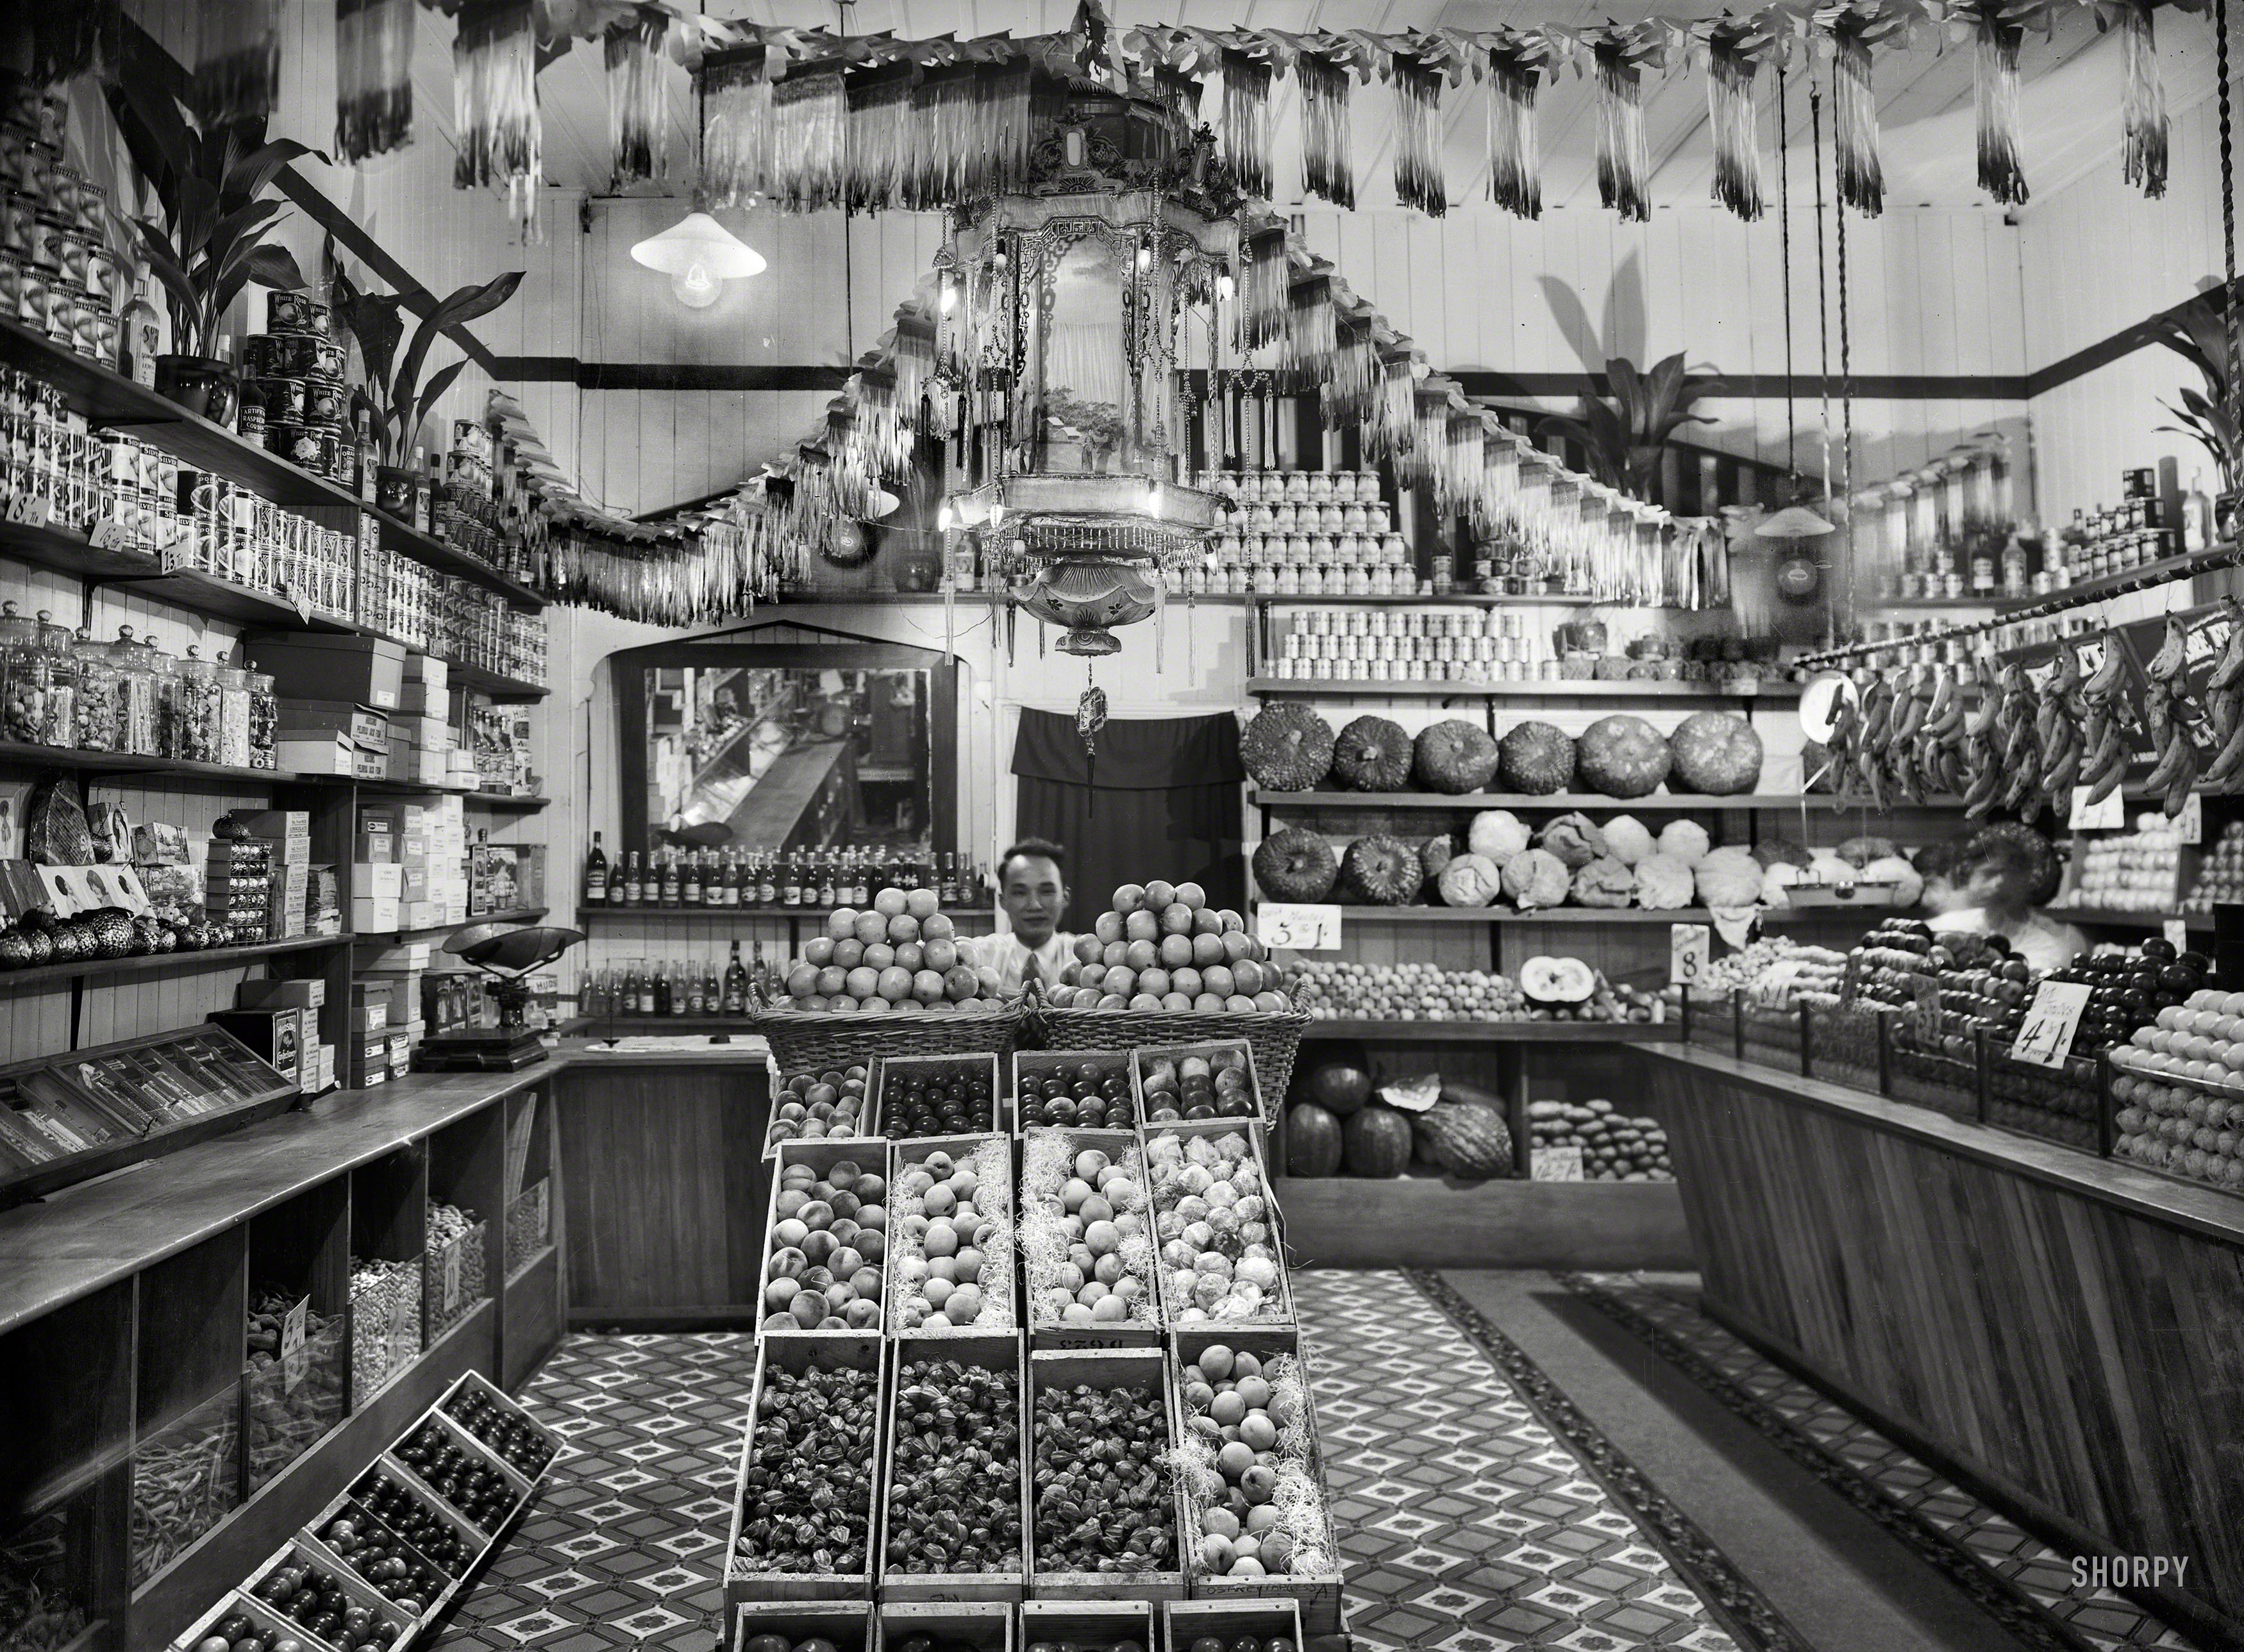 Circa 1920s New Zealand. "Greengrocery, probably Taranaki region. Chinese shopkeeper with baskets of apples and boxes of peaches, cape gooseberries and other fruits." Glass negative by John Reginald Wall. View full size.